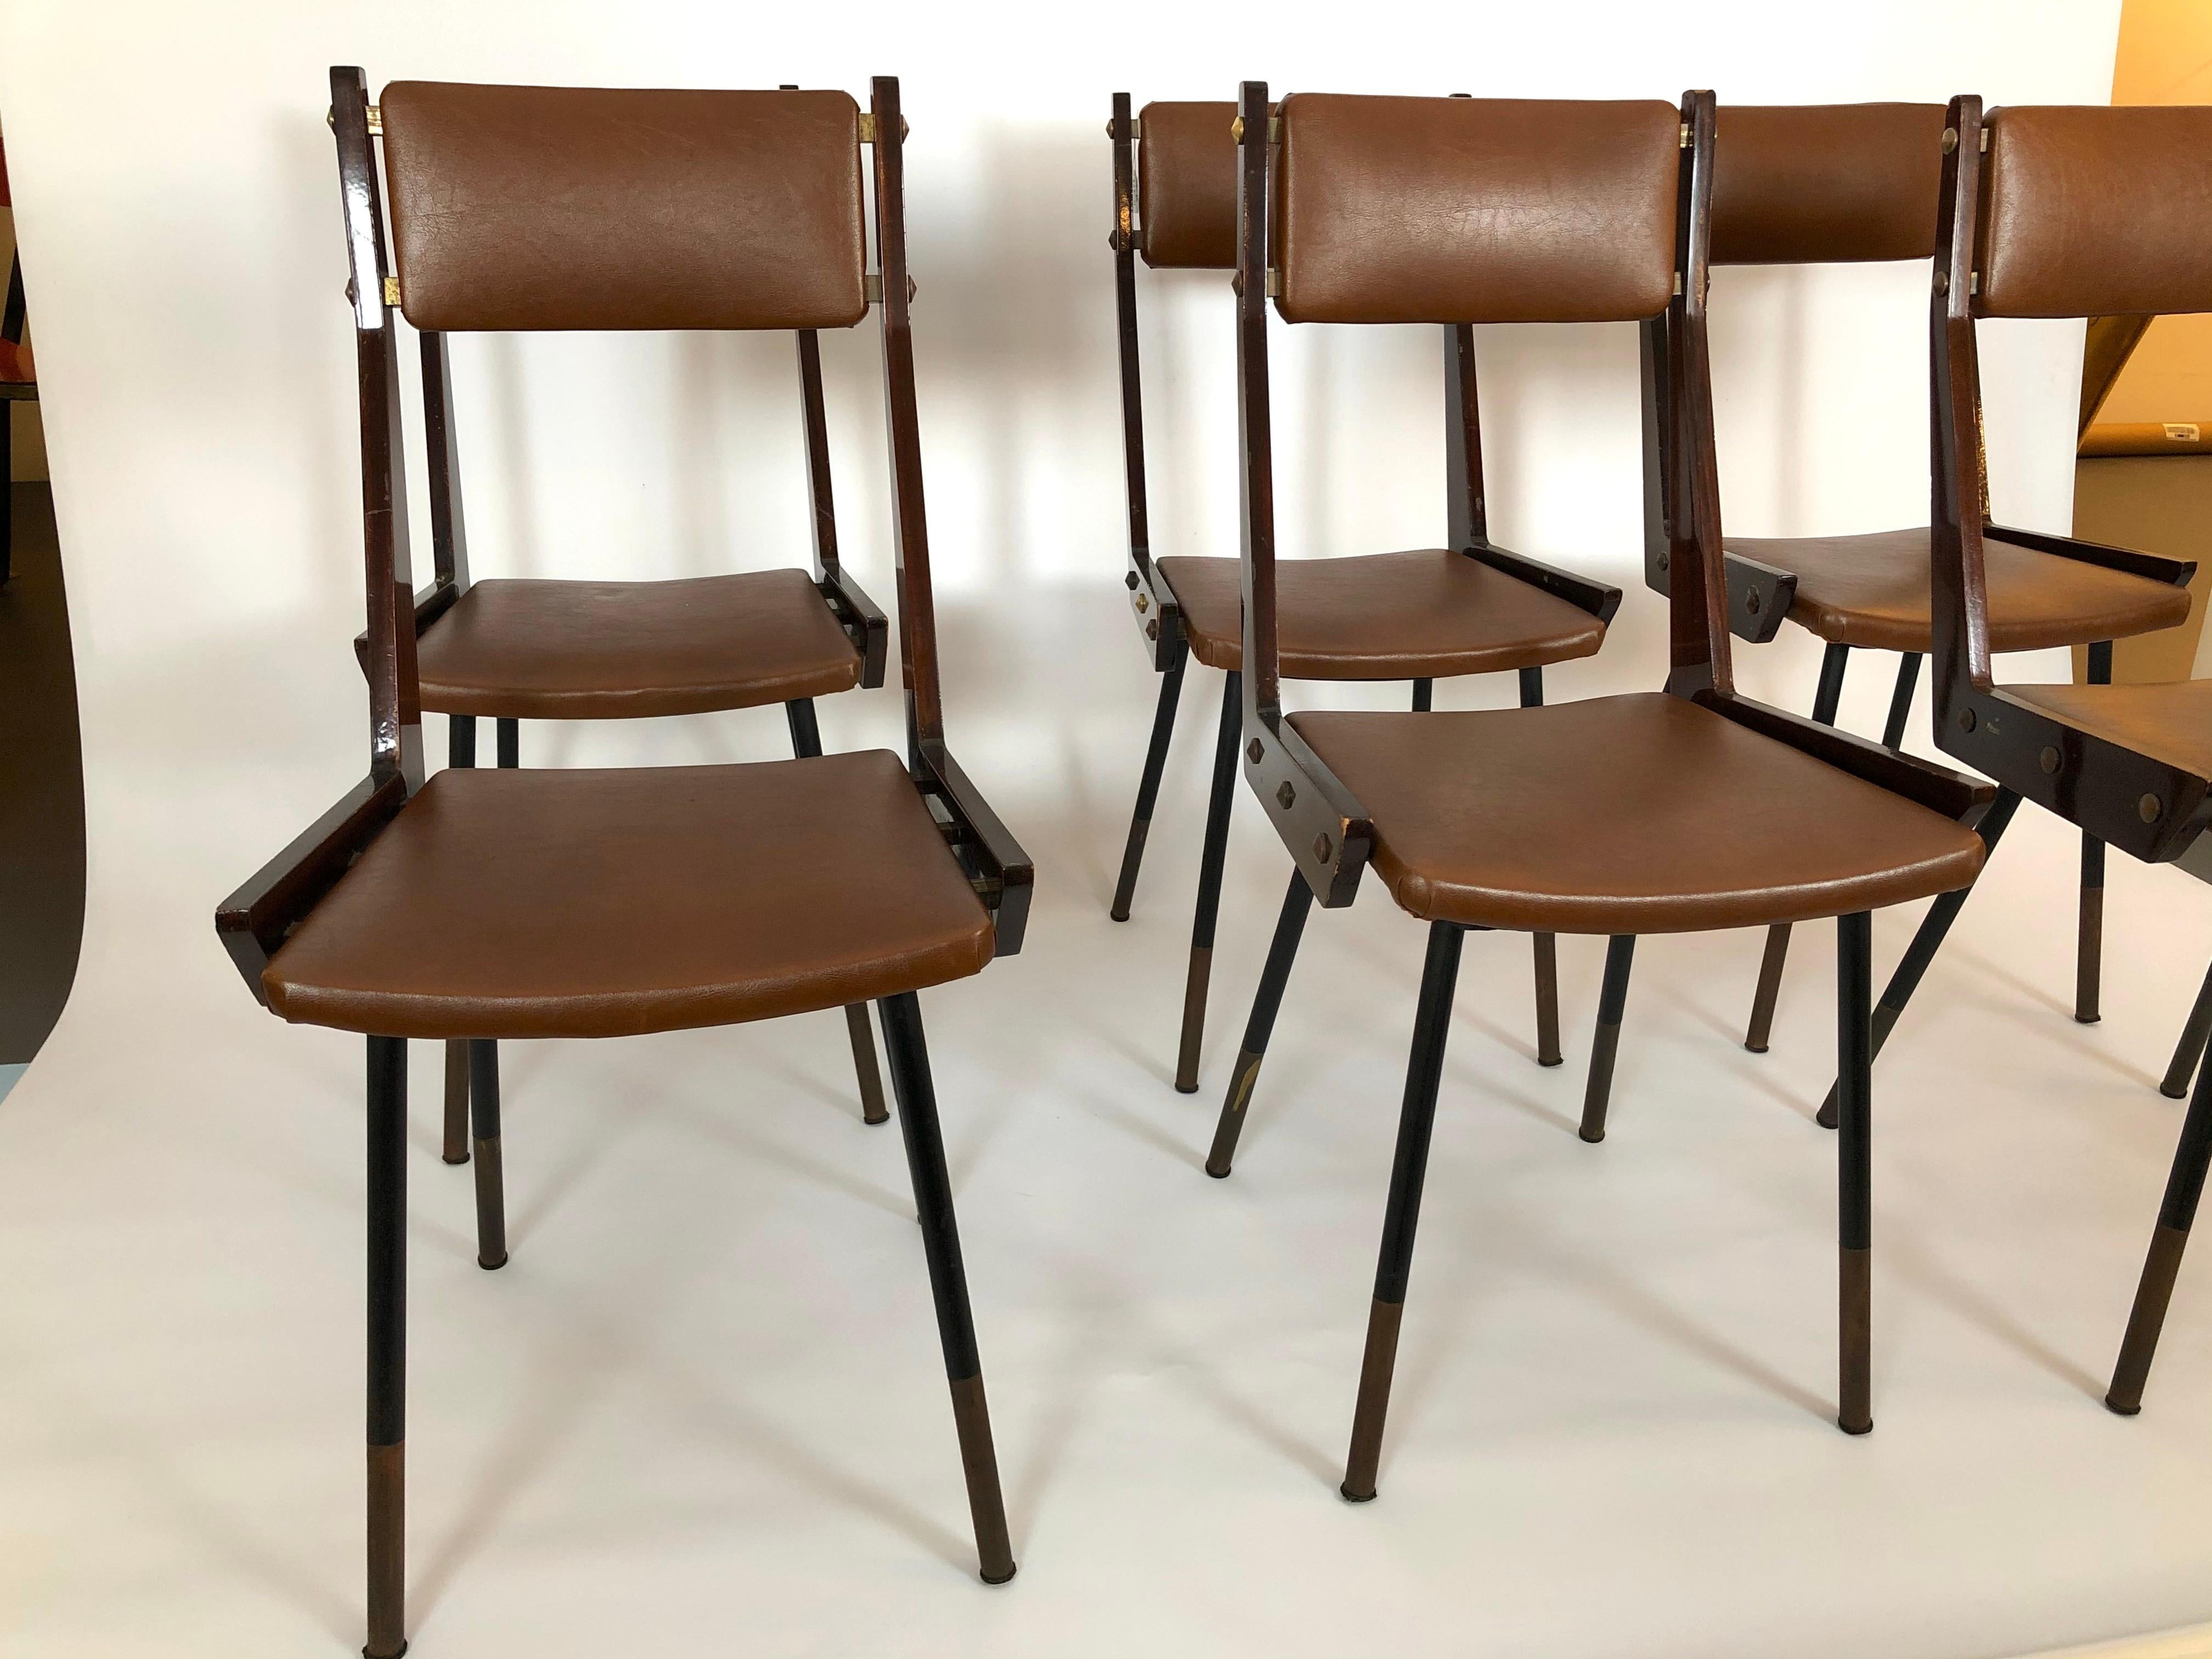 Good vintage condition with normal trace of age and use for this set of six dining chairs designed by Carlo Ratti and produced in Italy during the 50s. Made from wood, metal and beautiful brass details. Original brown leatherette.
